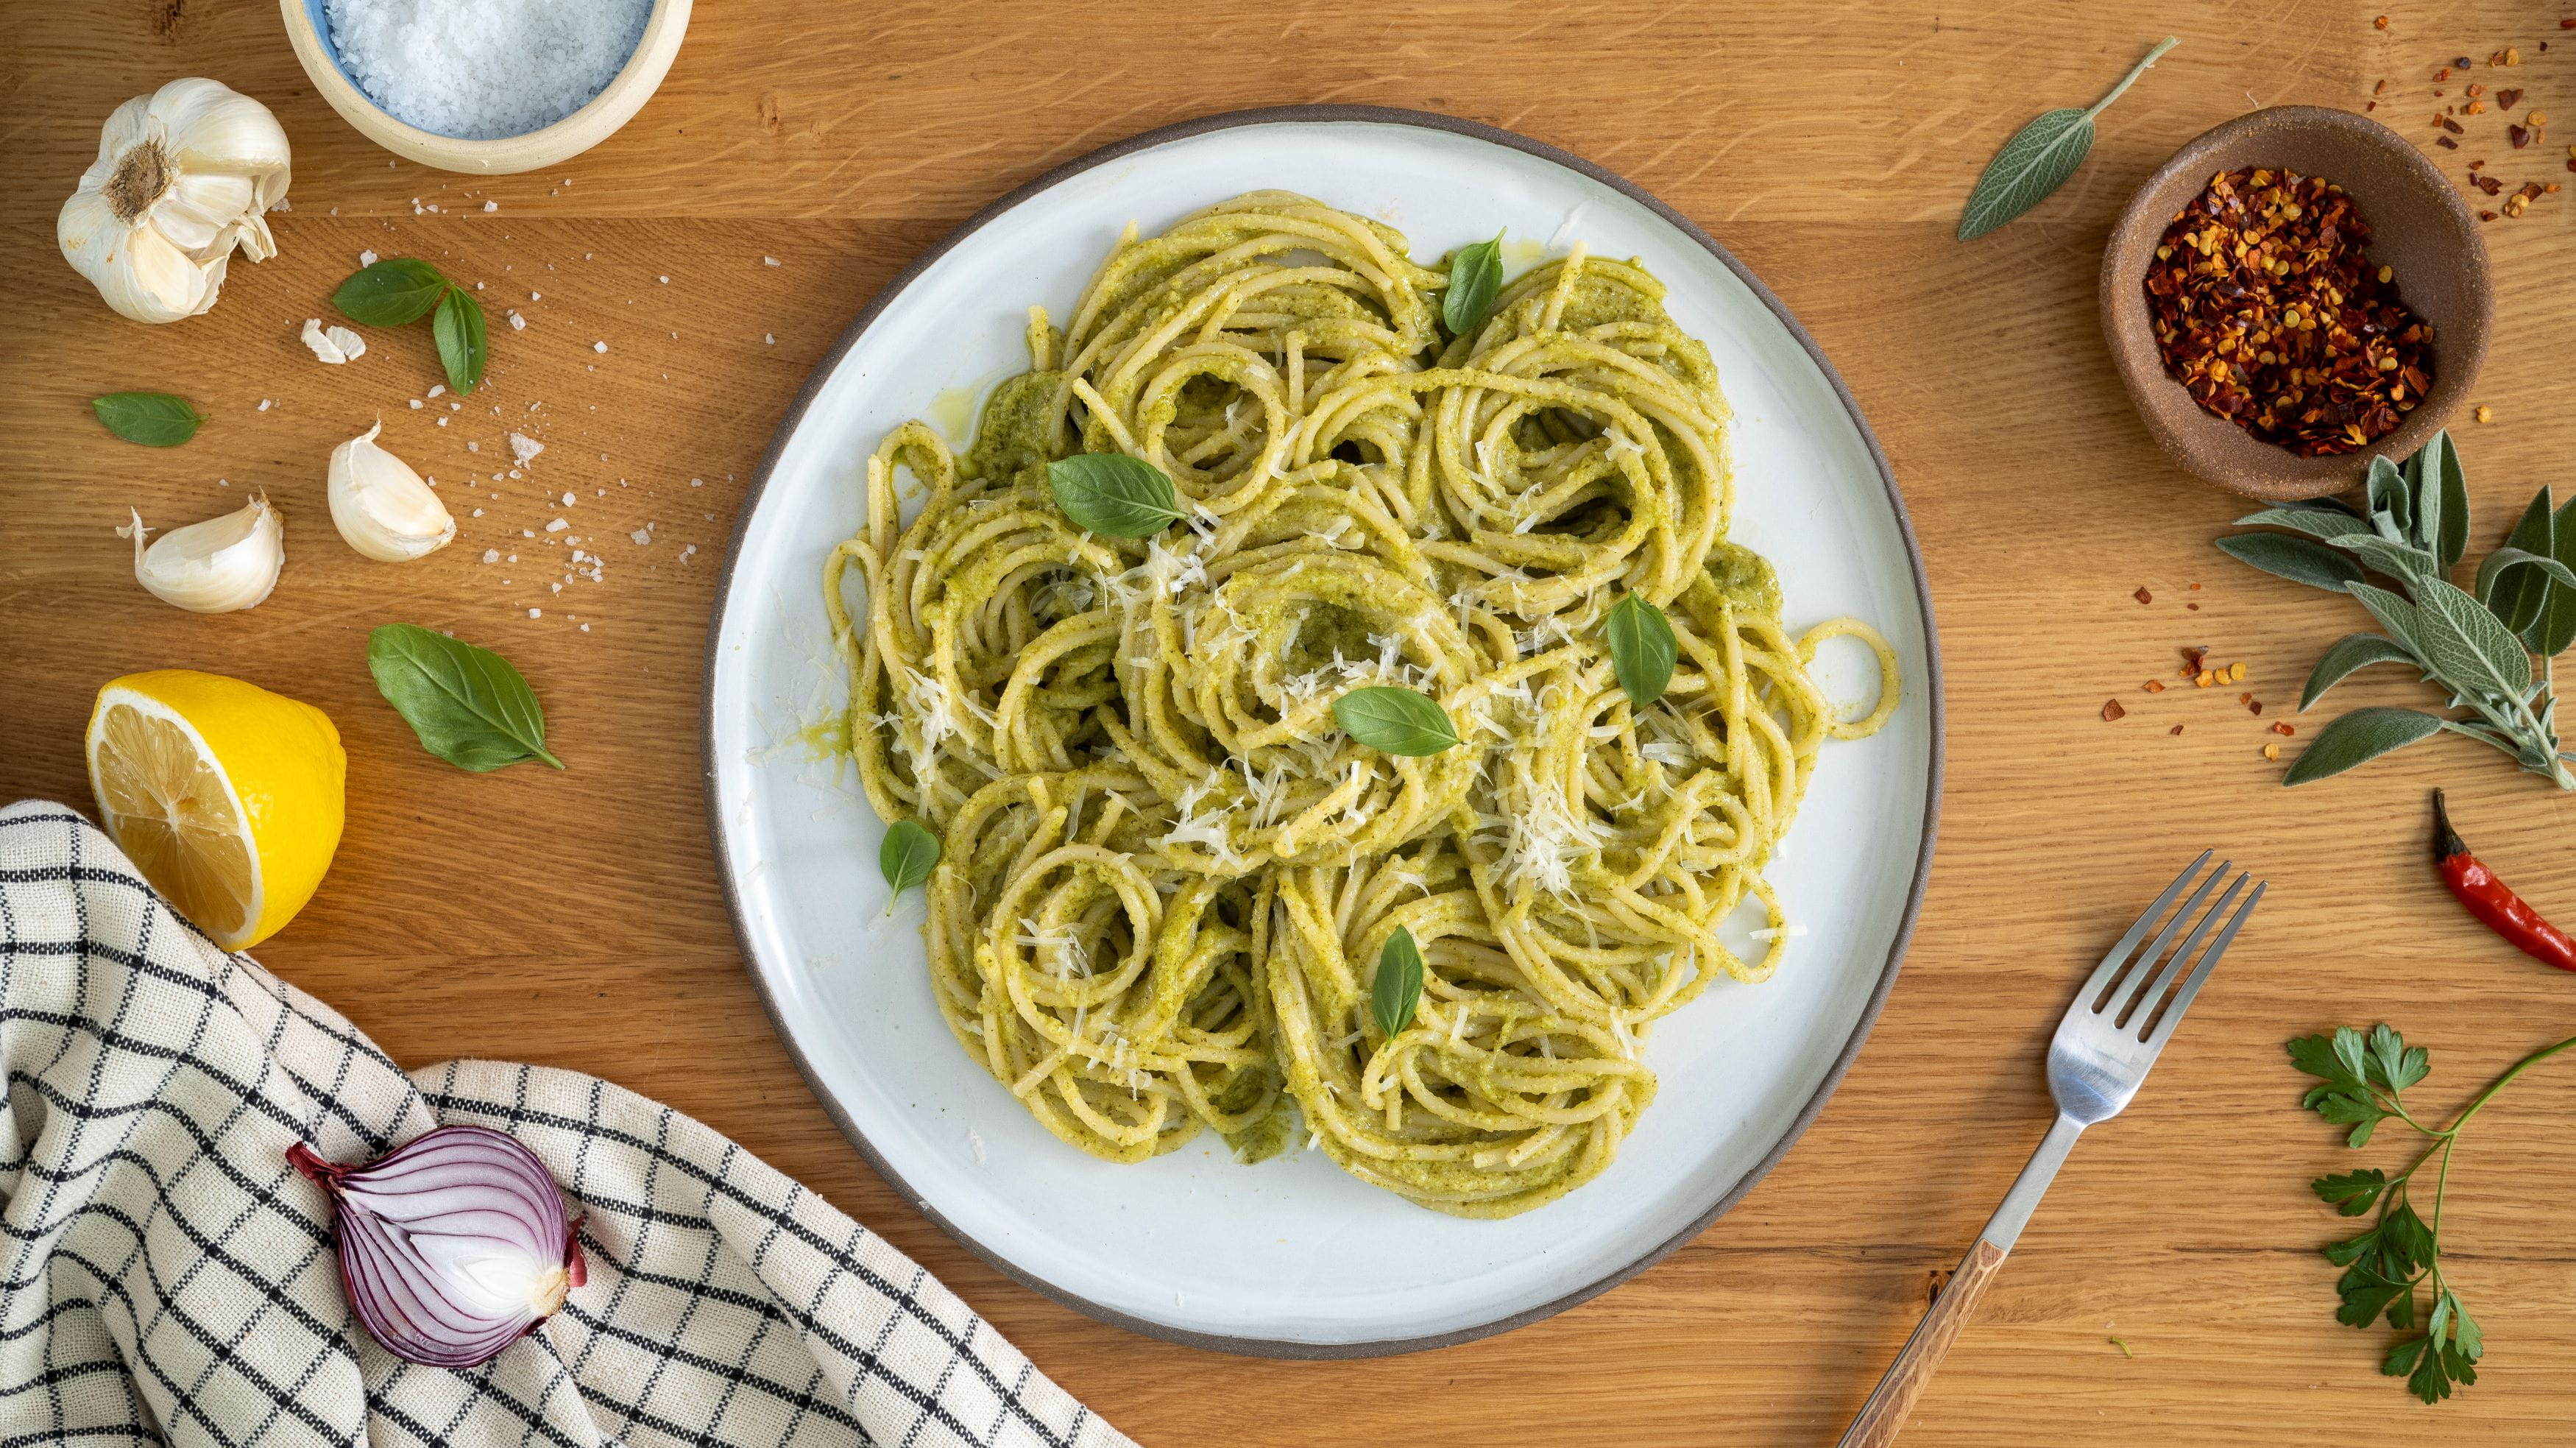 Delicious dairy-free pasta dishes with Violife